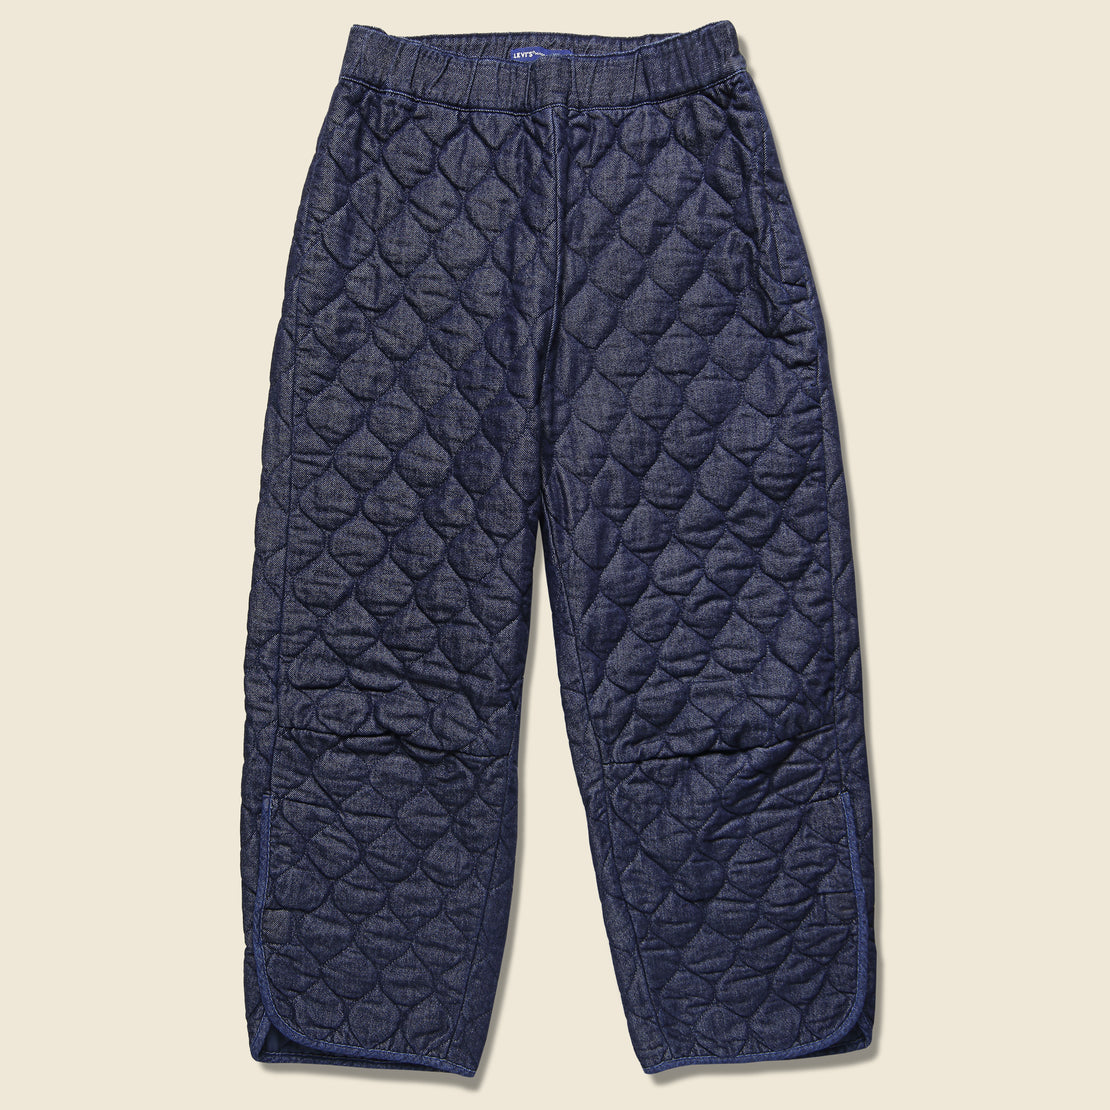 Levis Made & Crafted Roamer Quilted Pant - Medium Wash